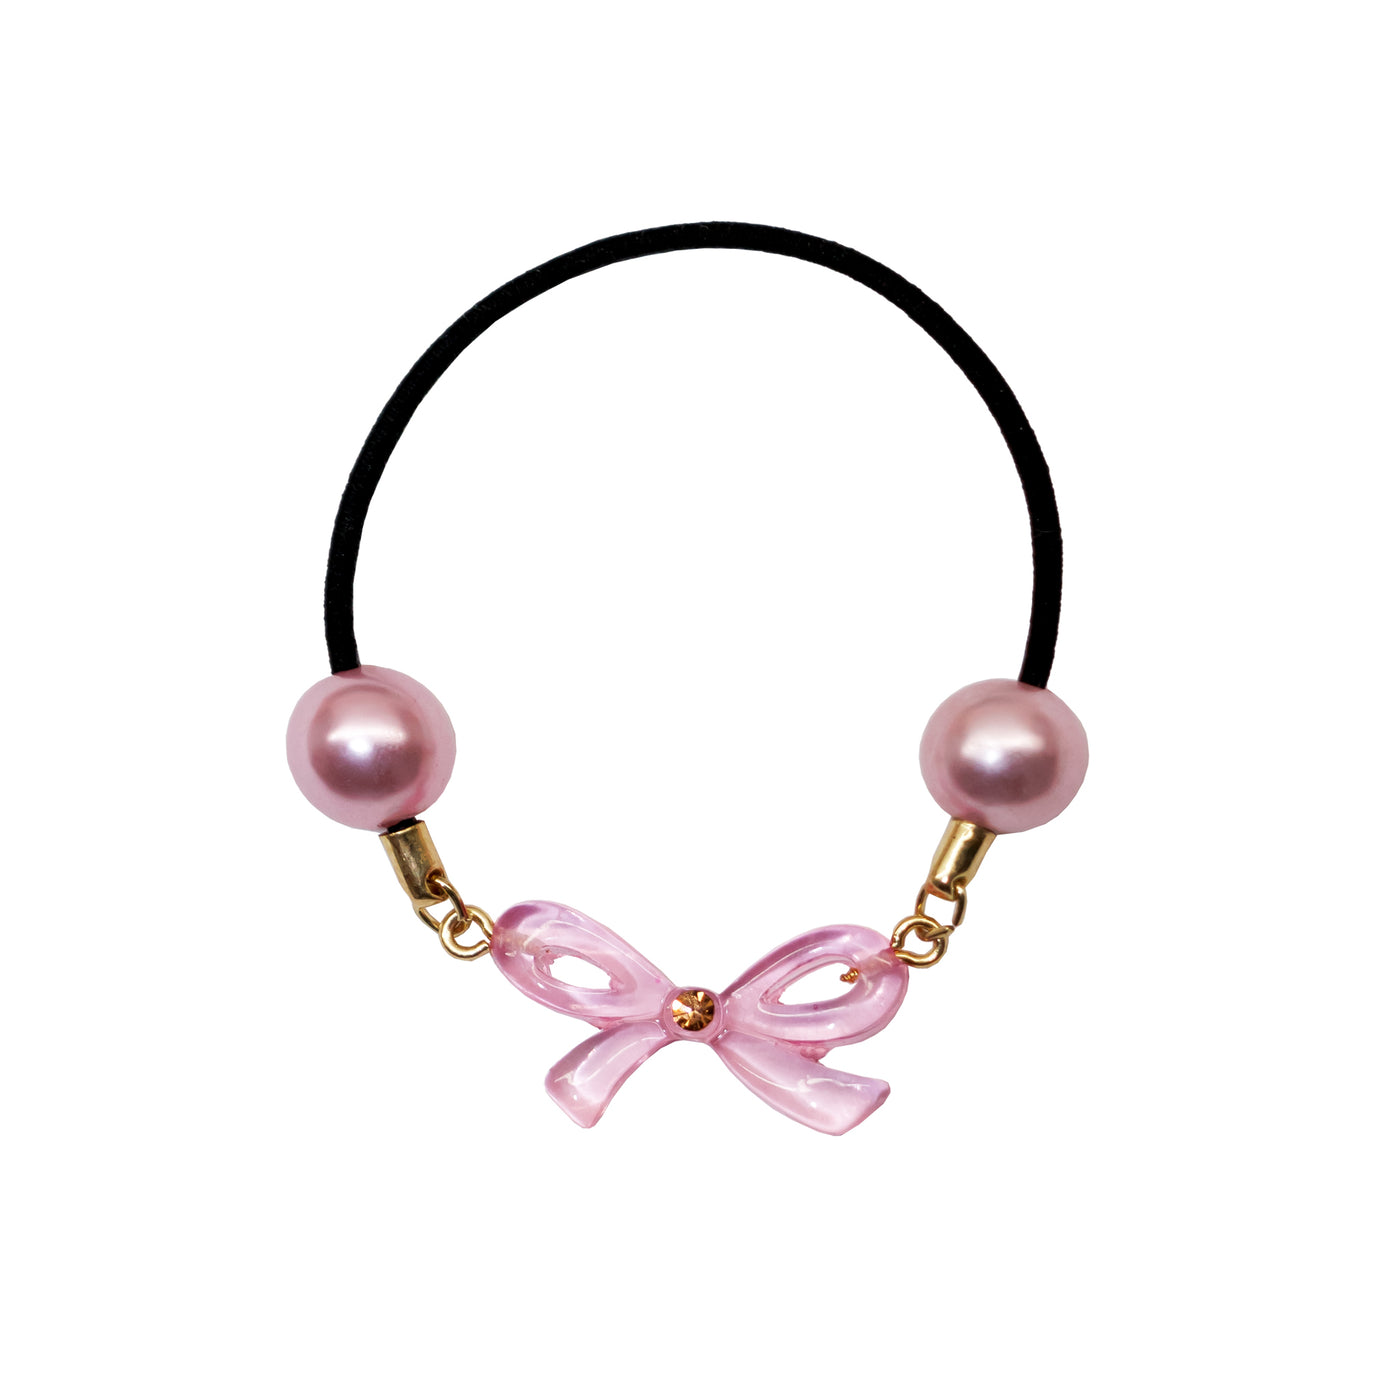 Bow Bobble Hair Tie in Pink Glaze